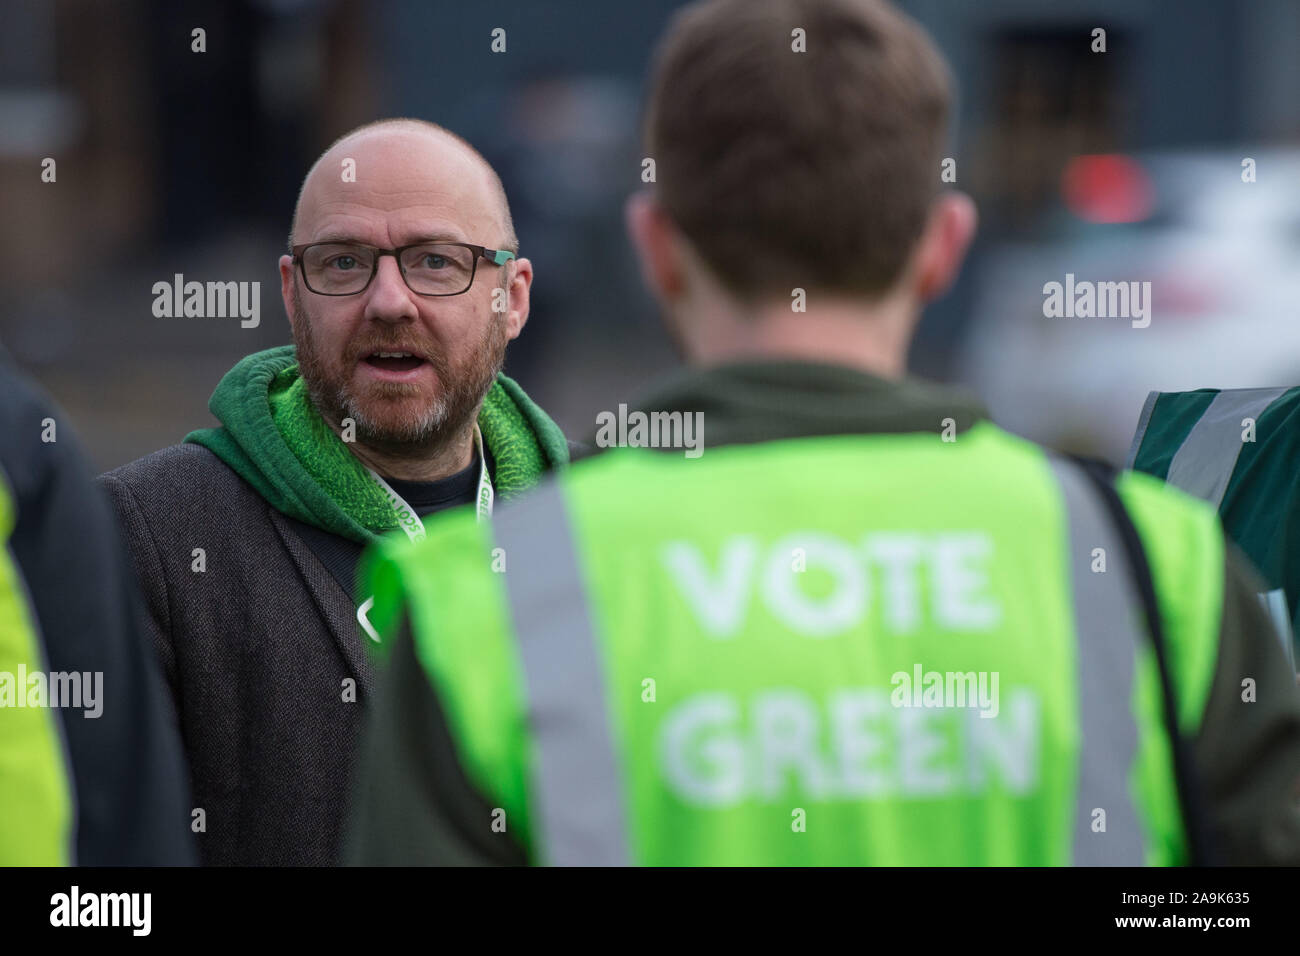 Glasgow, UK. 16th Nov, 2019. Pictured: Patrick Harvie MSP - Co Leader of the Scottish Green Party. Photo op for the Scottish Green Party on the General Election Campaign Trail. Patrick joins party activists to go round the neighbourhood door knocking and having conversations with the local residents. Credit: Colin Fisher/Alamy Live News Stock Photo